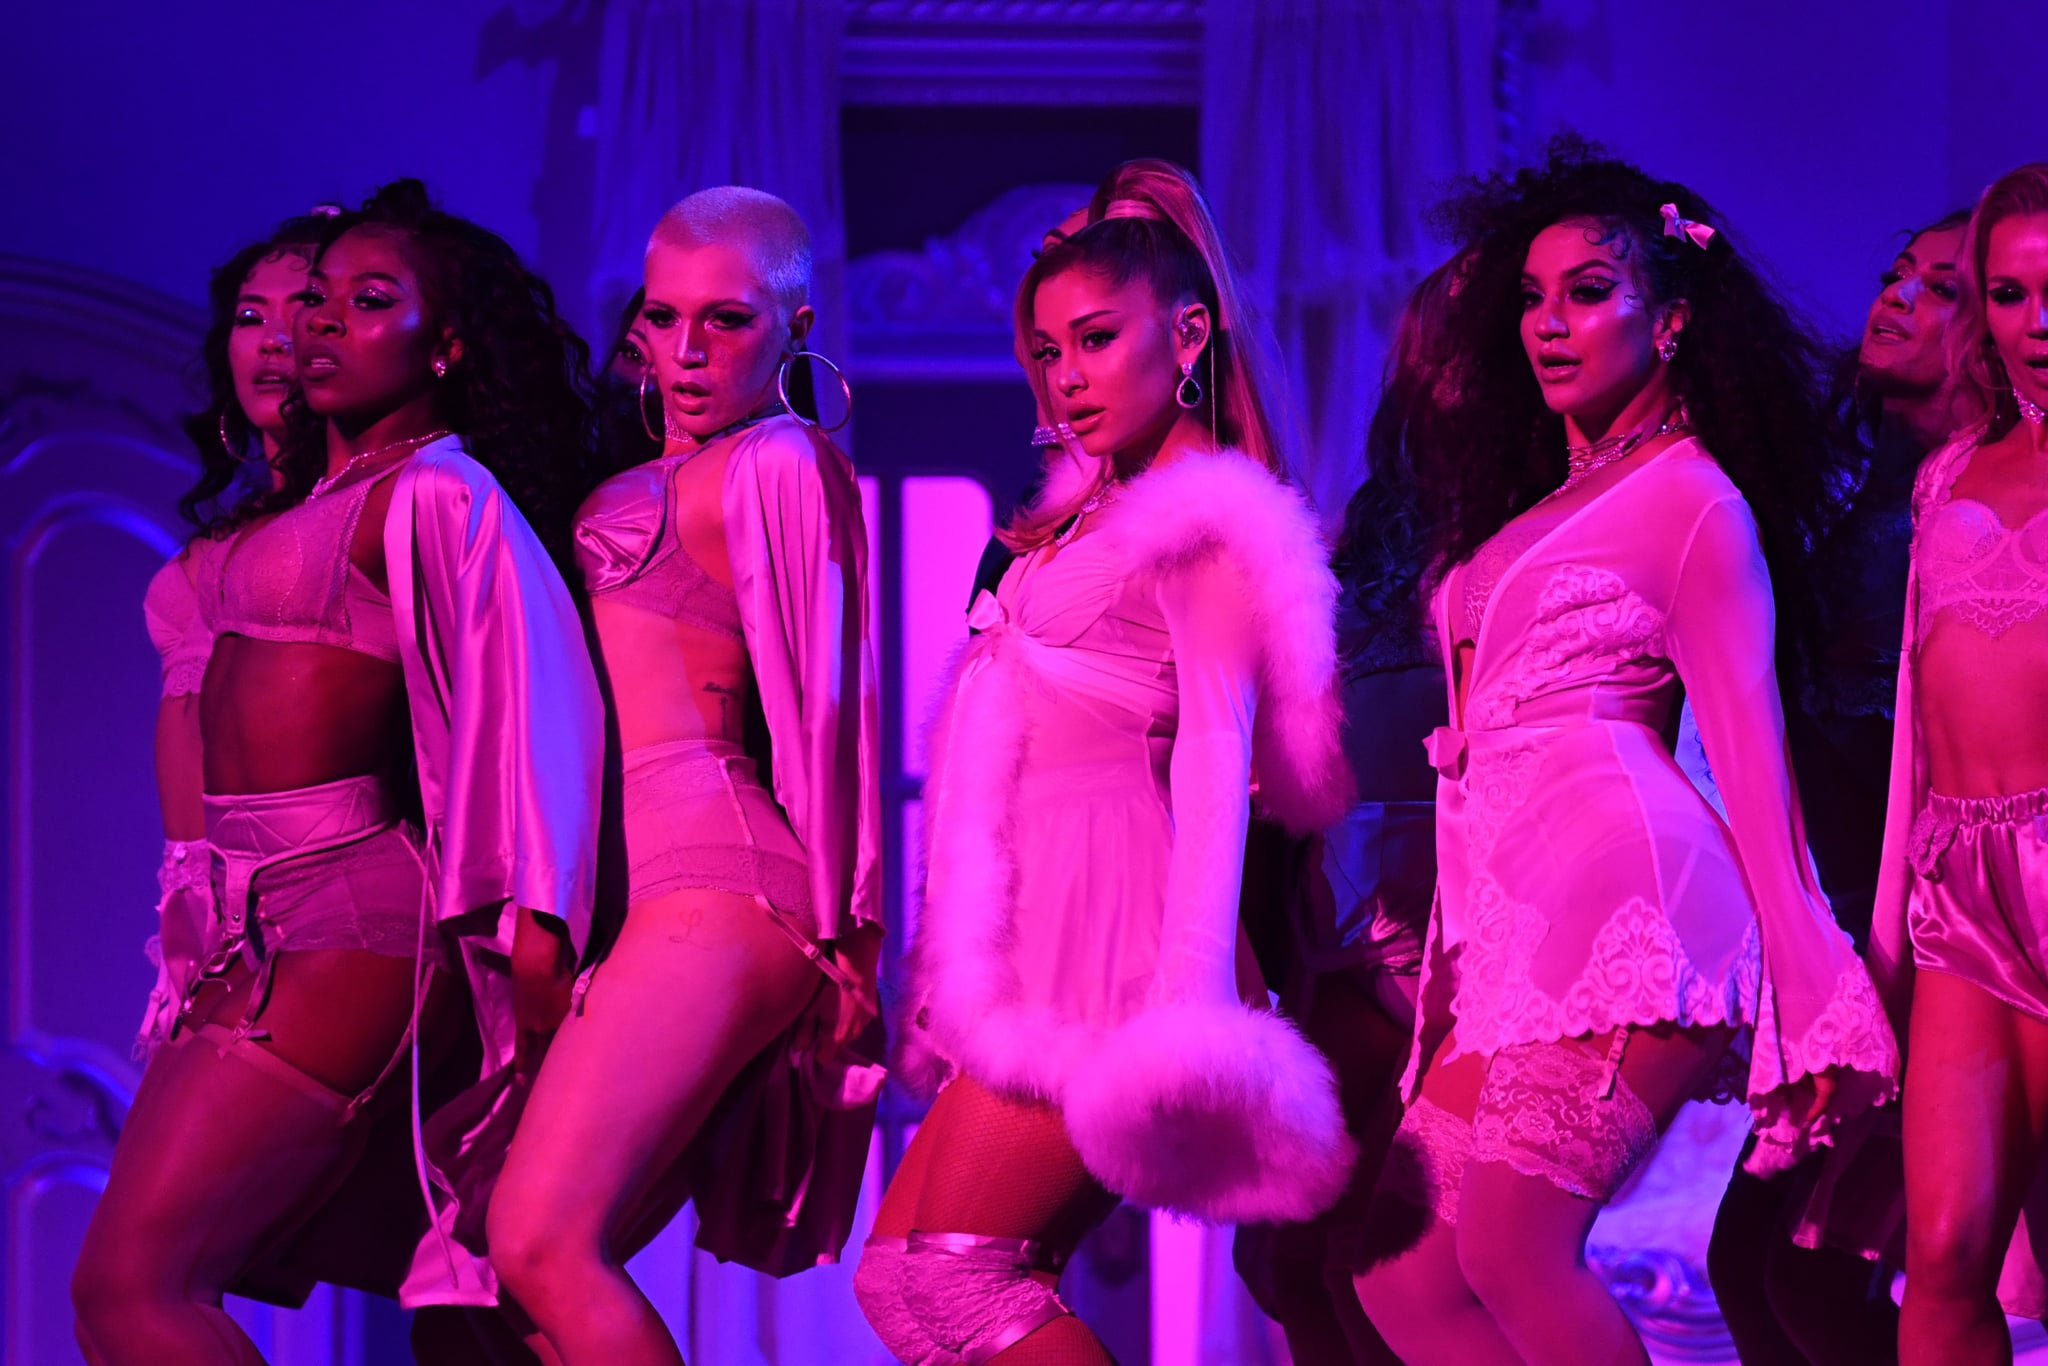 Ariana Grande facing copyright suit over “7 Rings” | The FADER